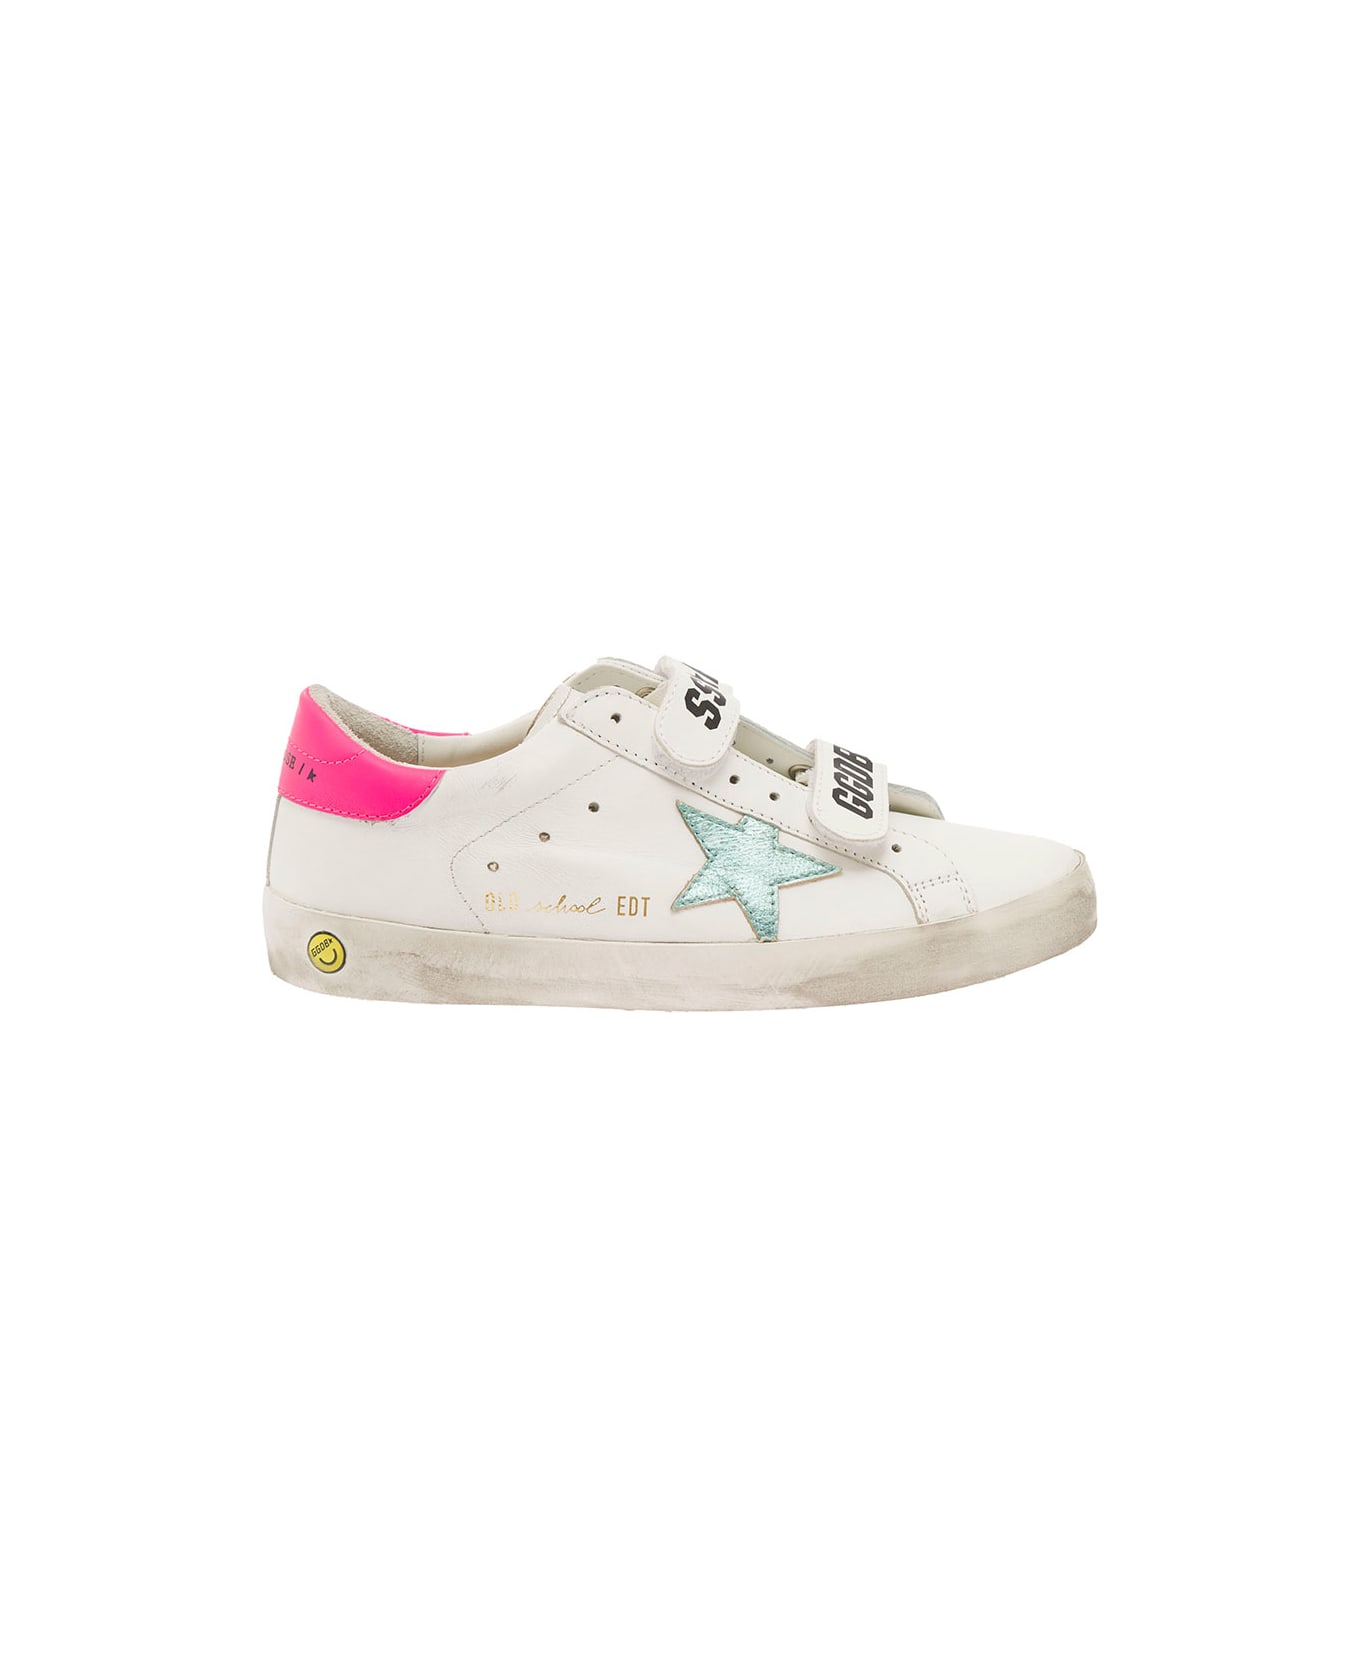 Golden Goose Old School Whtie Leather Sneakers With Logo Golden Goose Girl - White